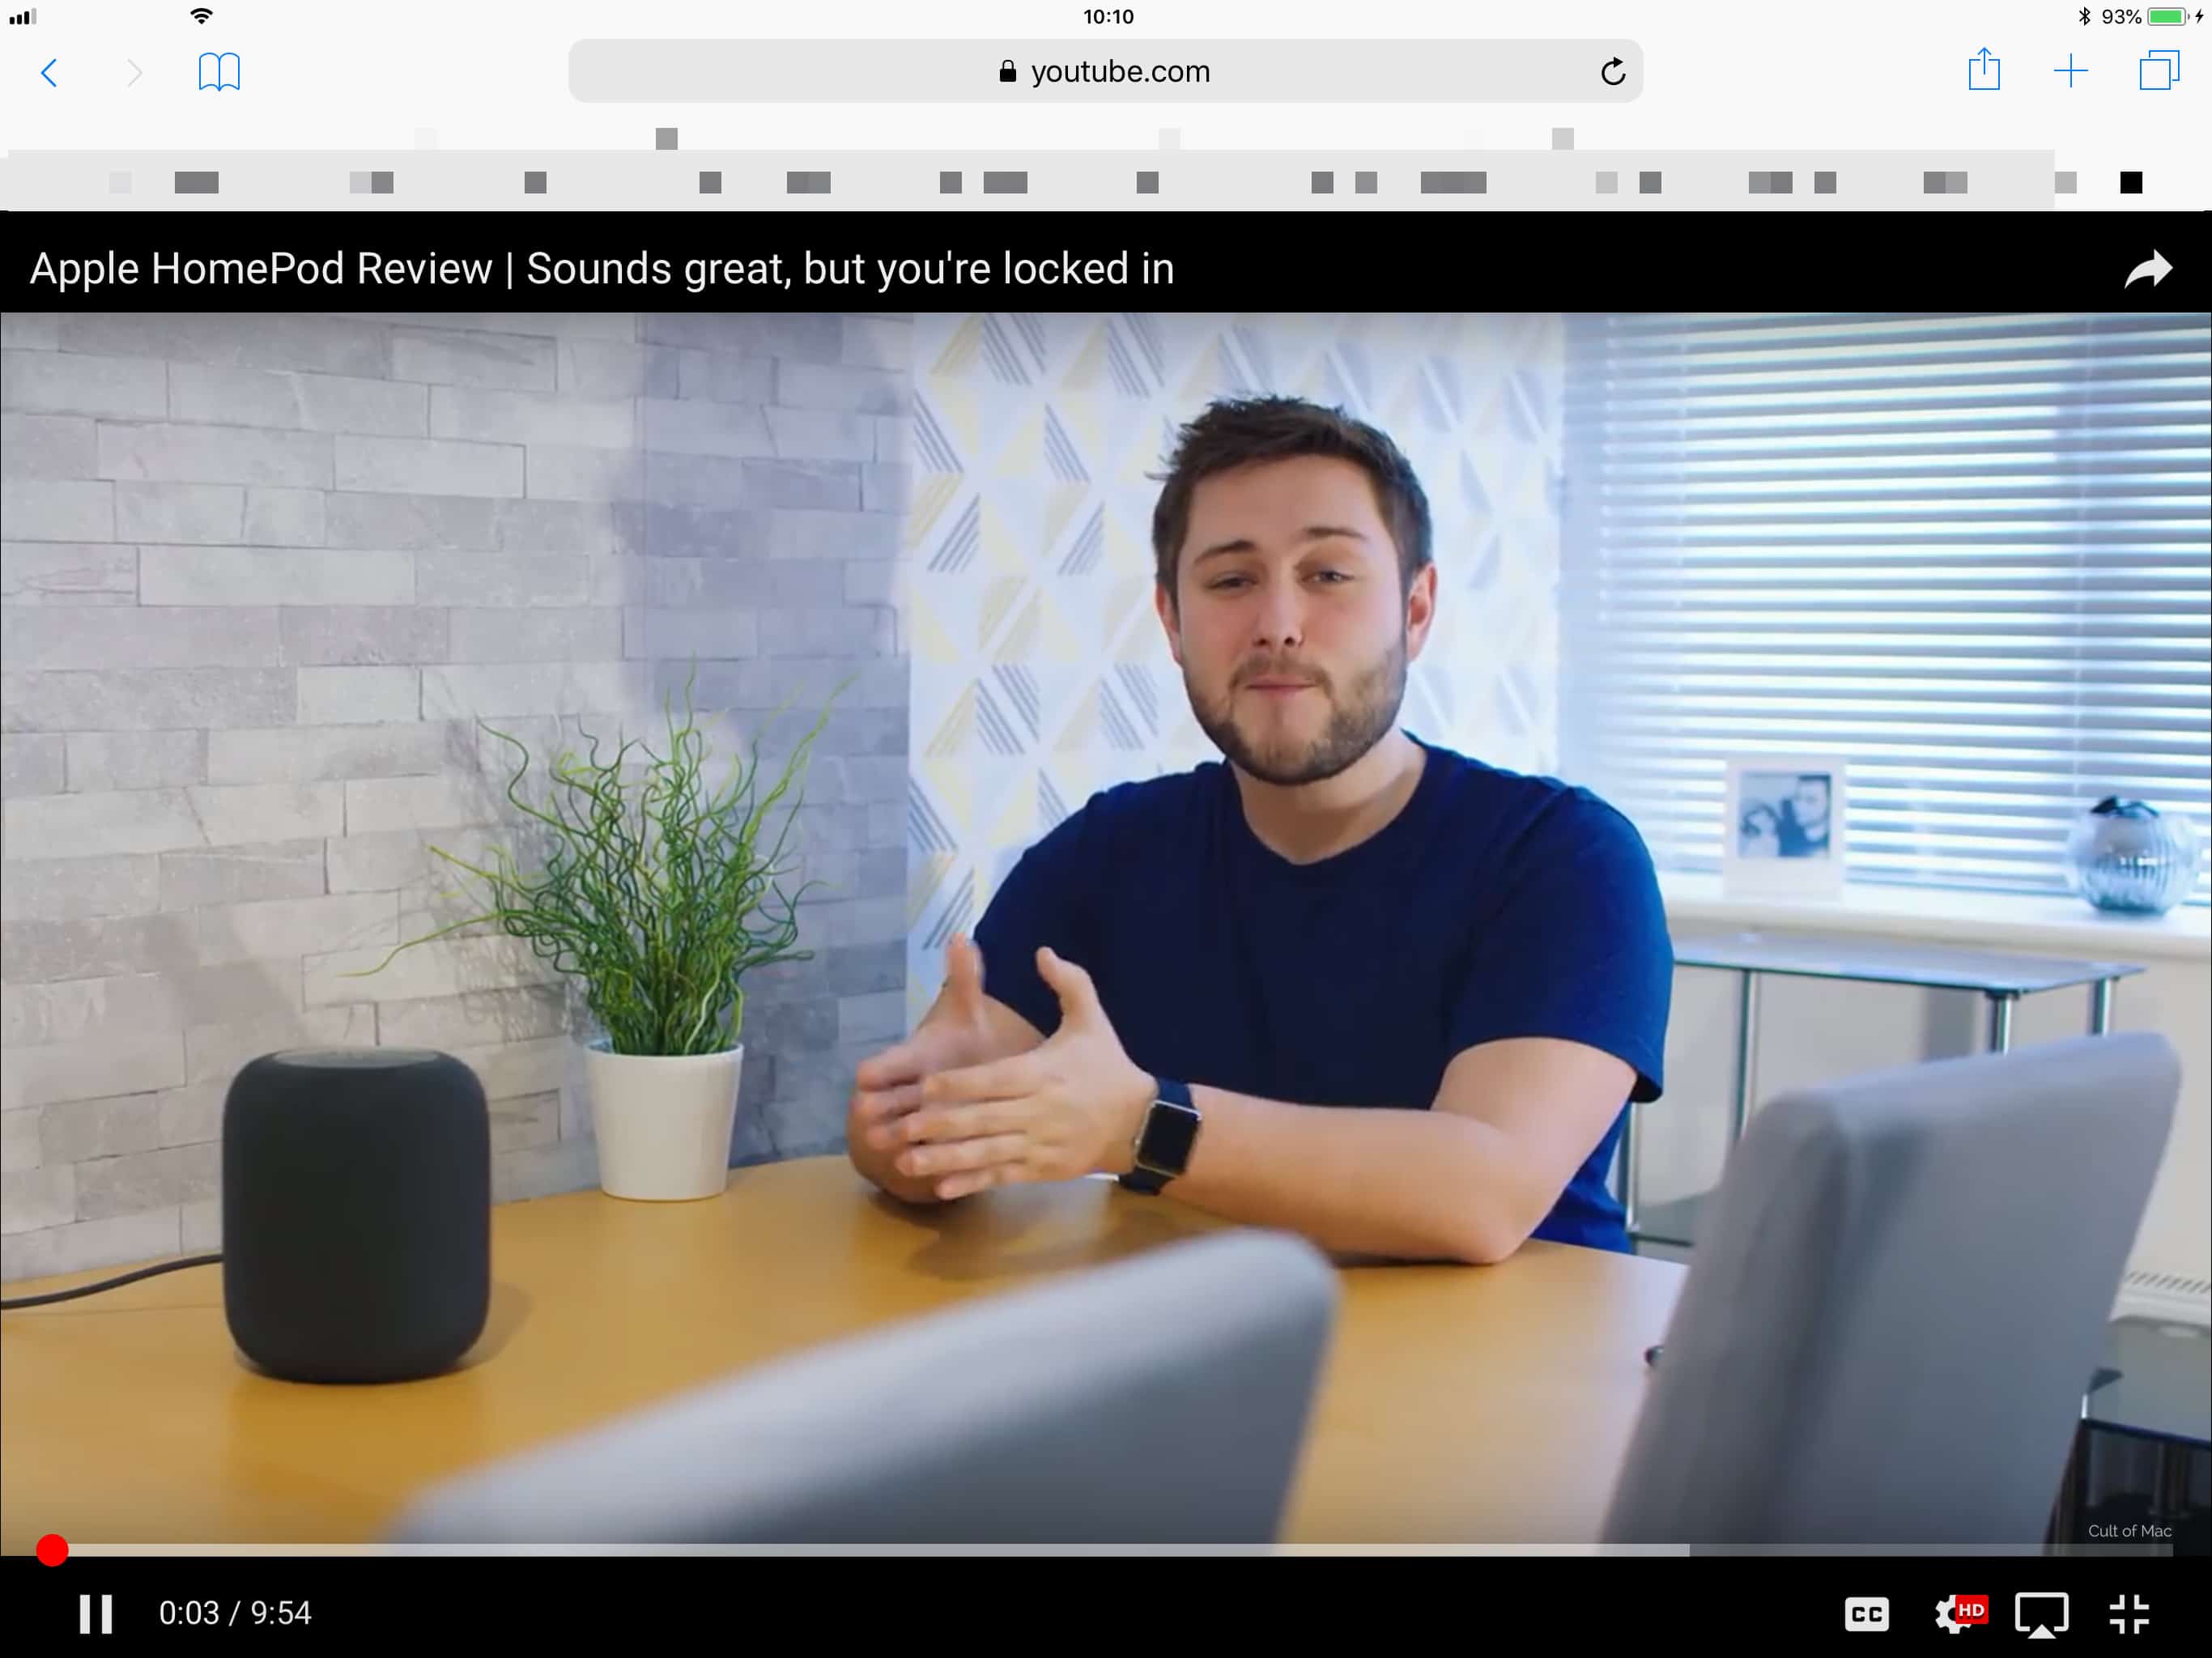 Ugh. This is YouTube's supposed 'Full Screen' view.